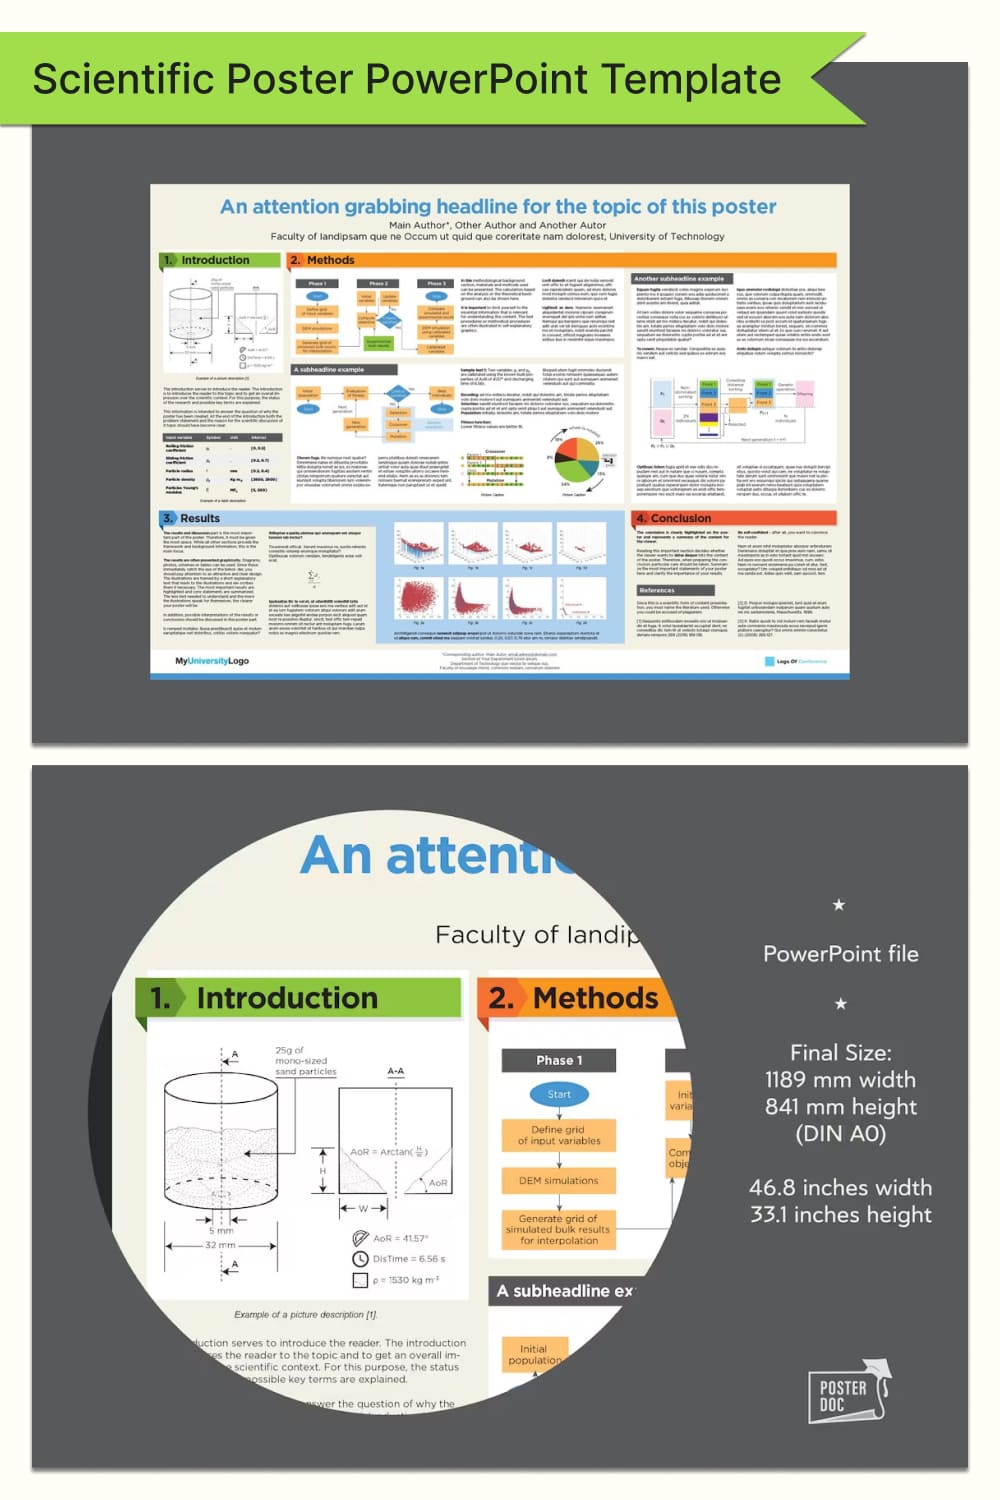 Science Poster PowerPoint Template - Pinterest.